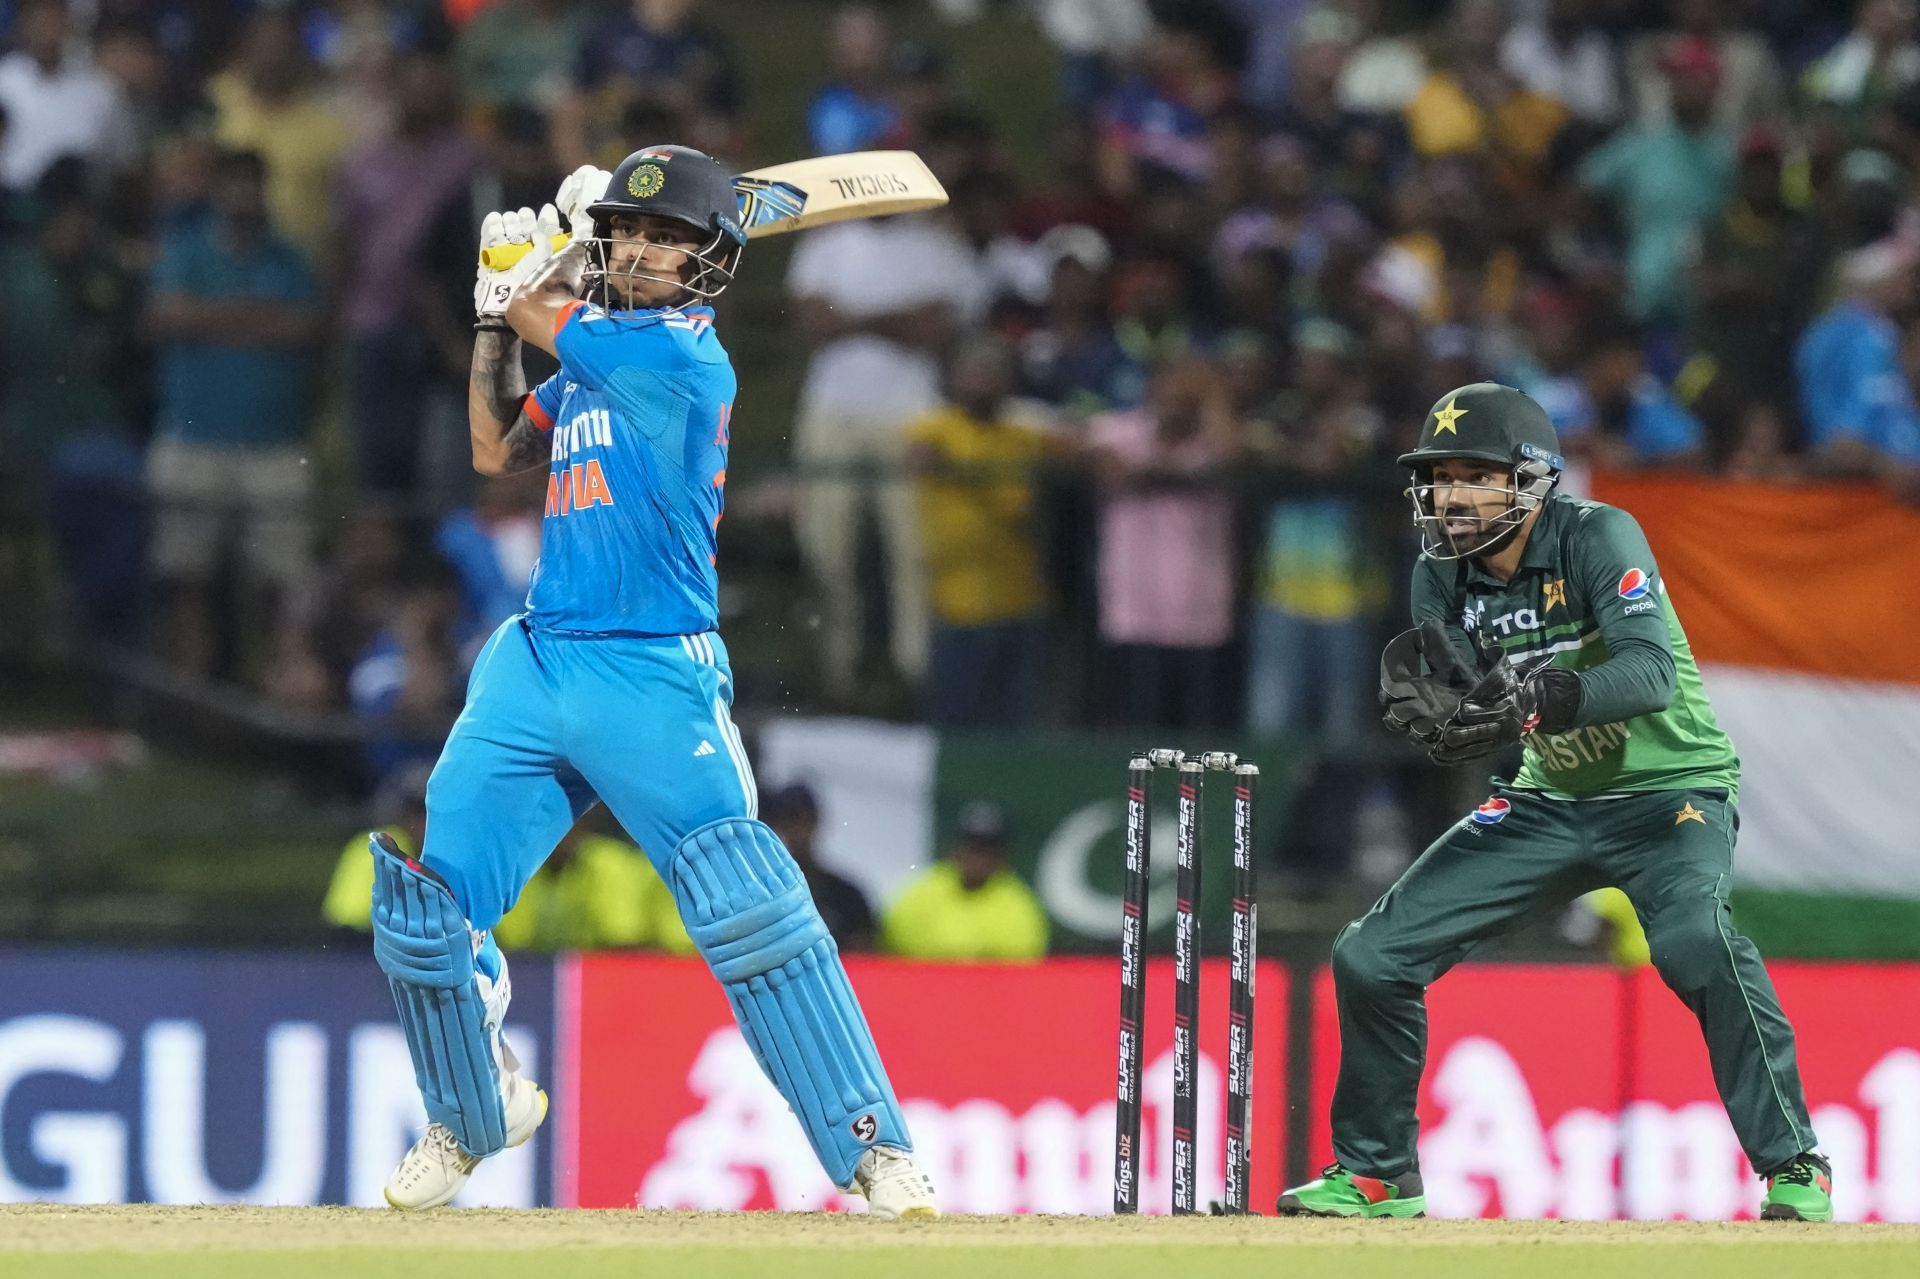 Ishan Kishan walked out to bat in the 10th over in the group game against Pakistan. [P/C: AP]